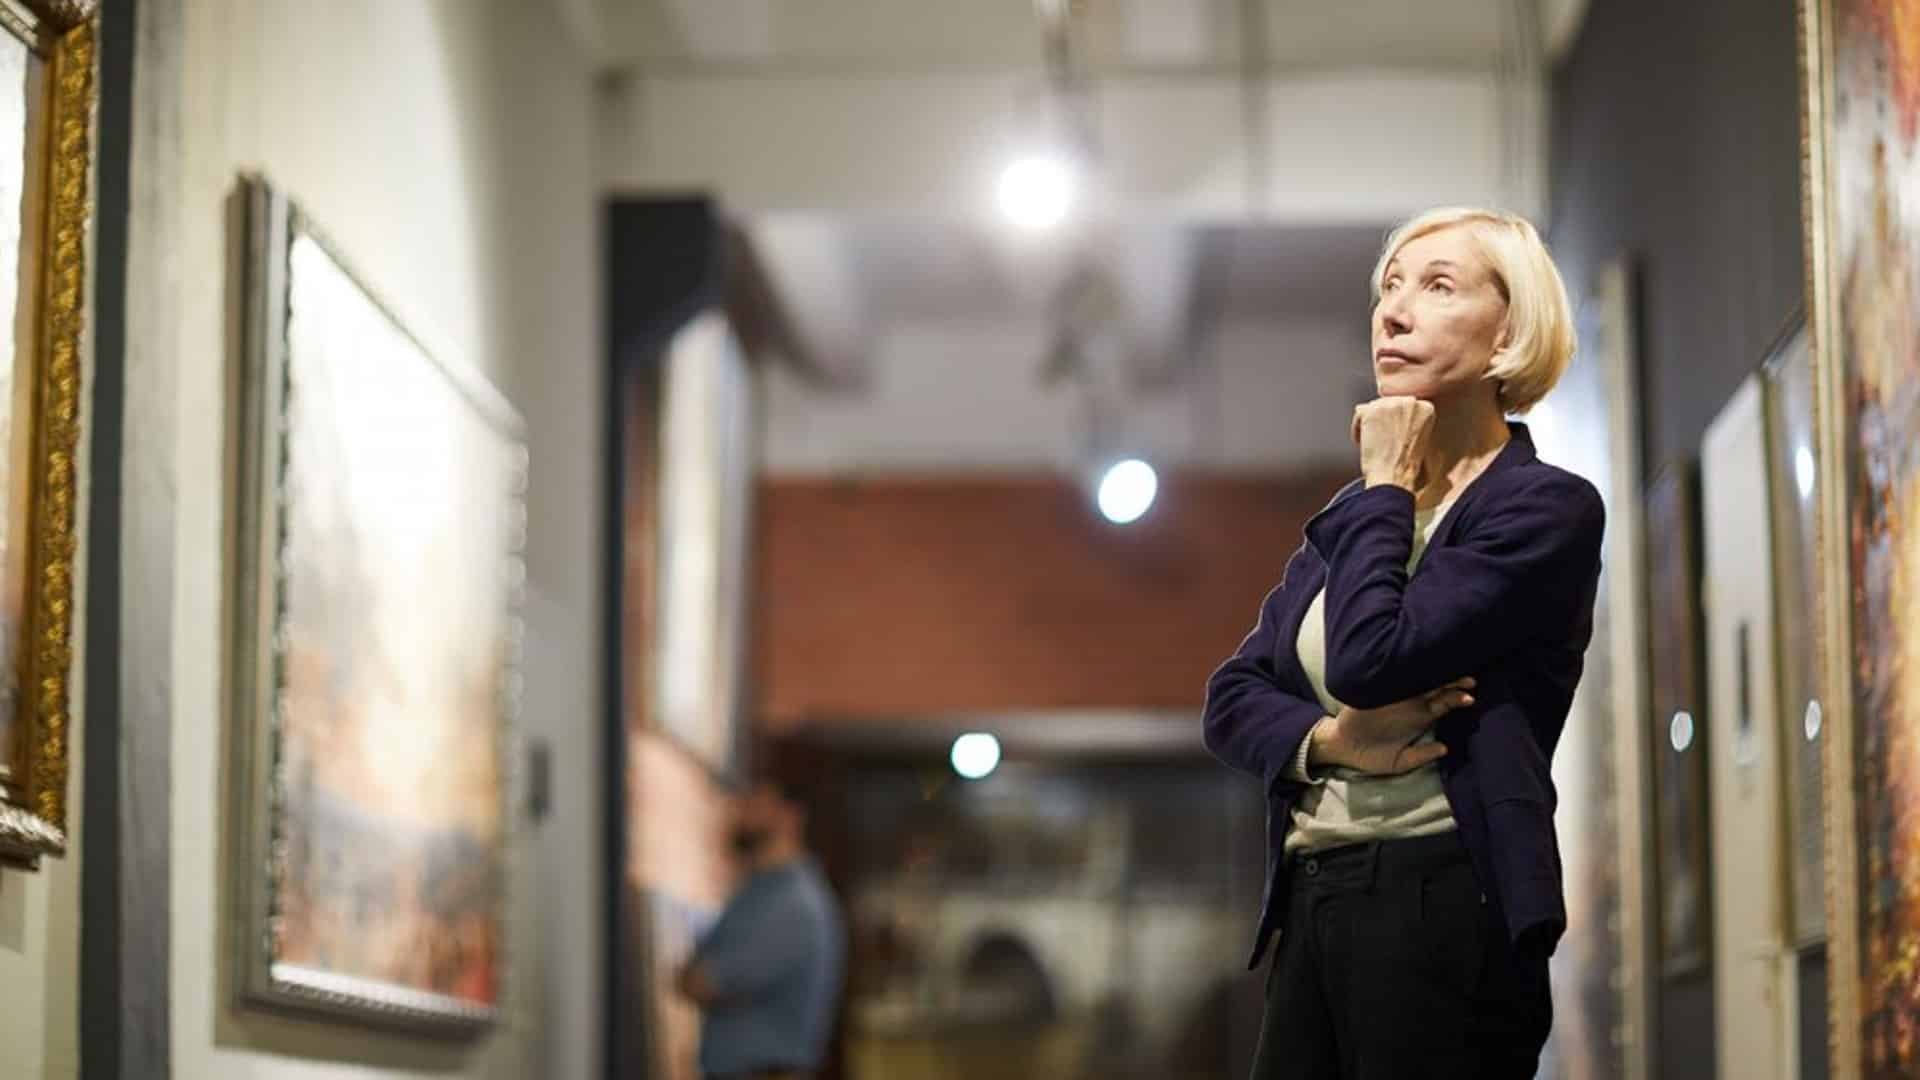 A woman admiring art in a museum